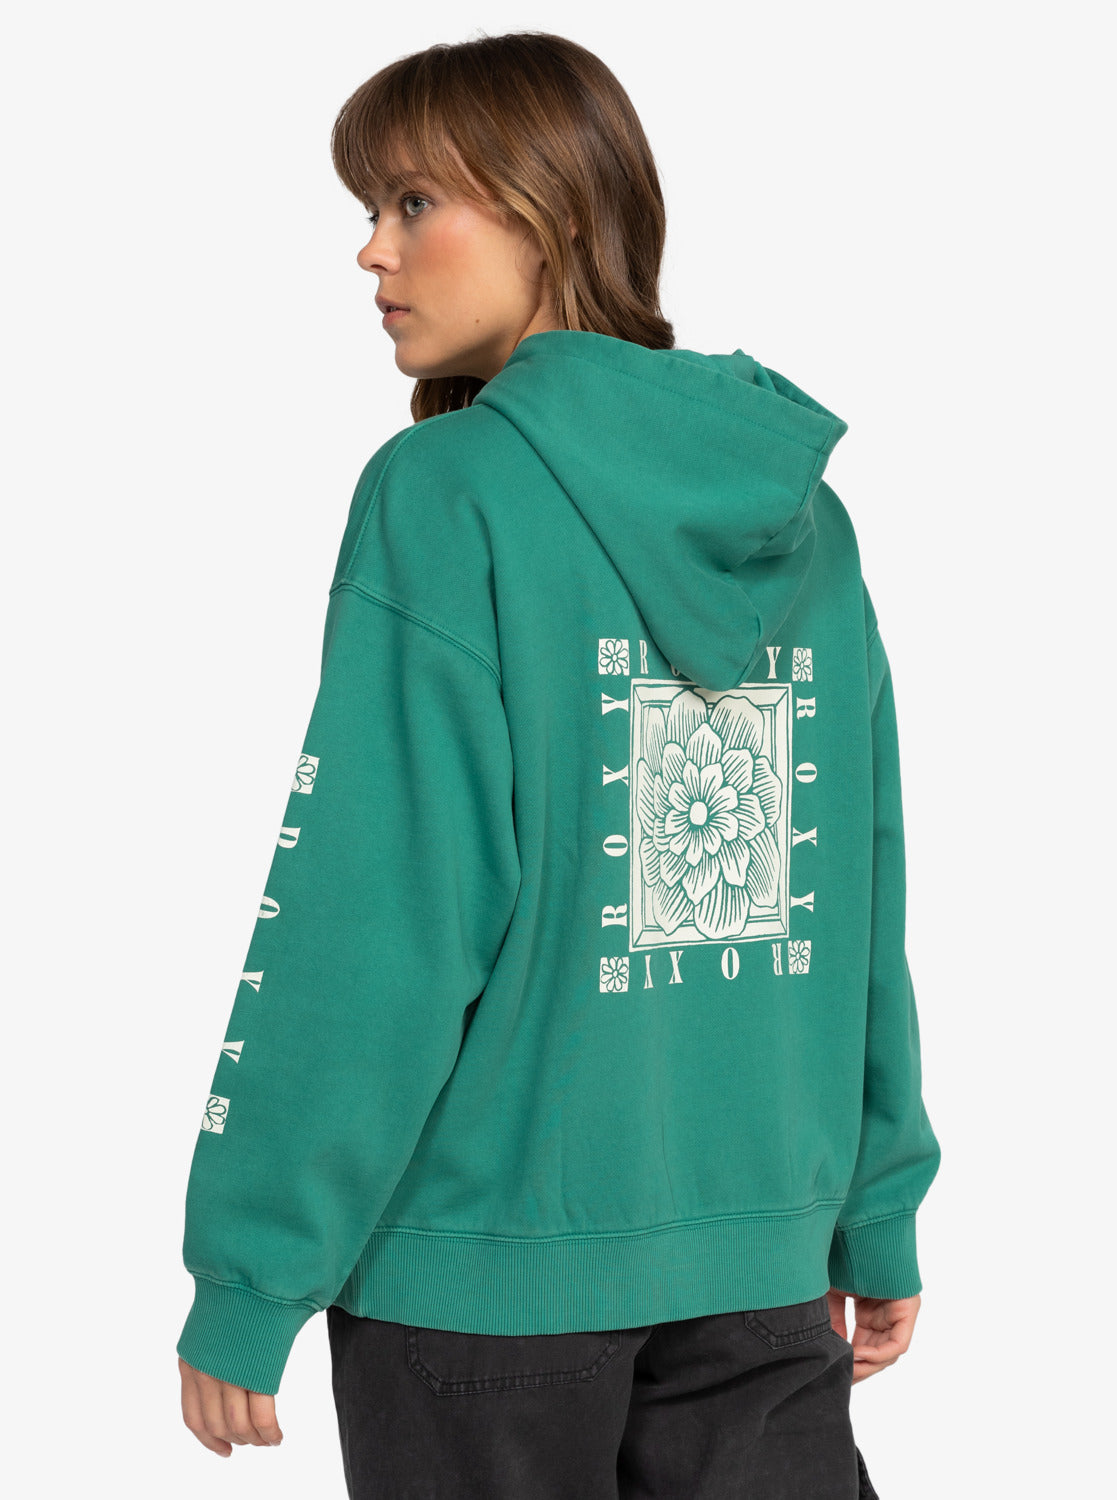 Roxy Into the Light Hoodie - Galapagos Green - Star Surf + Skate